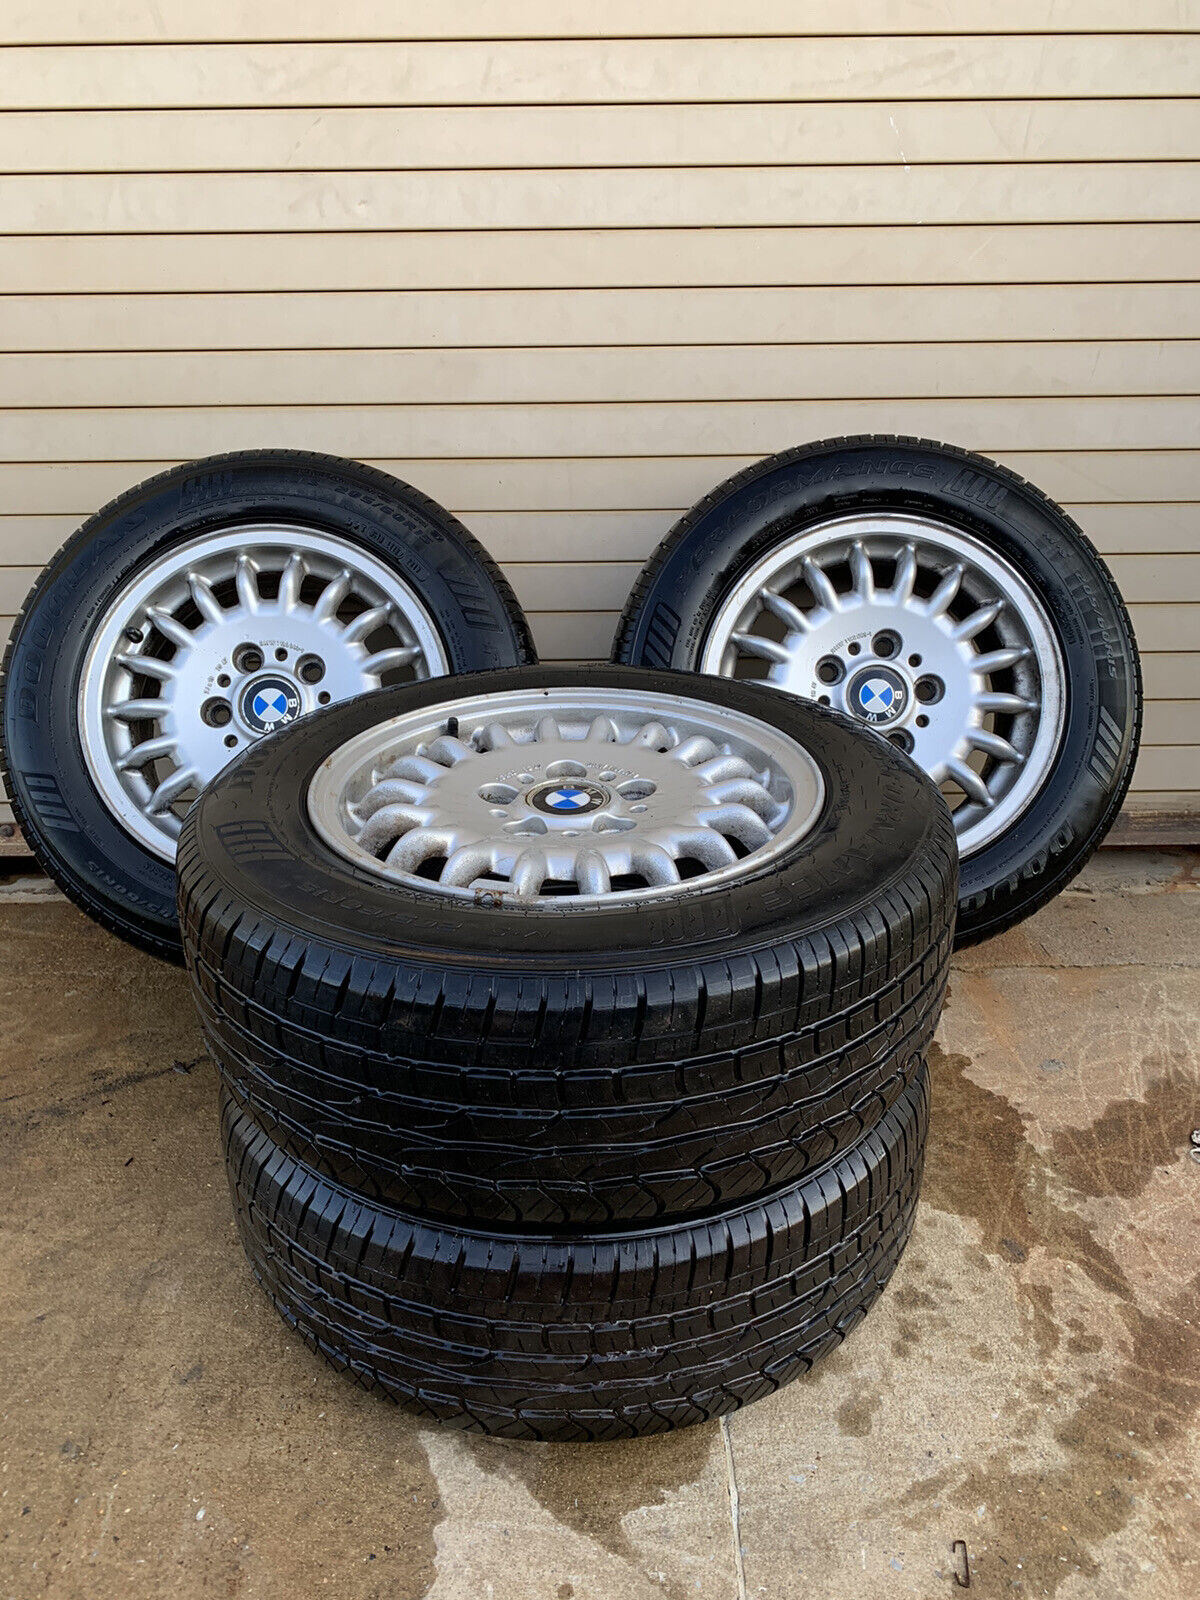 OEM WHEELS AND TIRES 1992 BMW 325is E 36